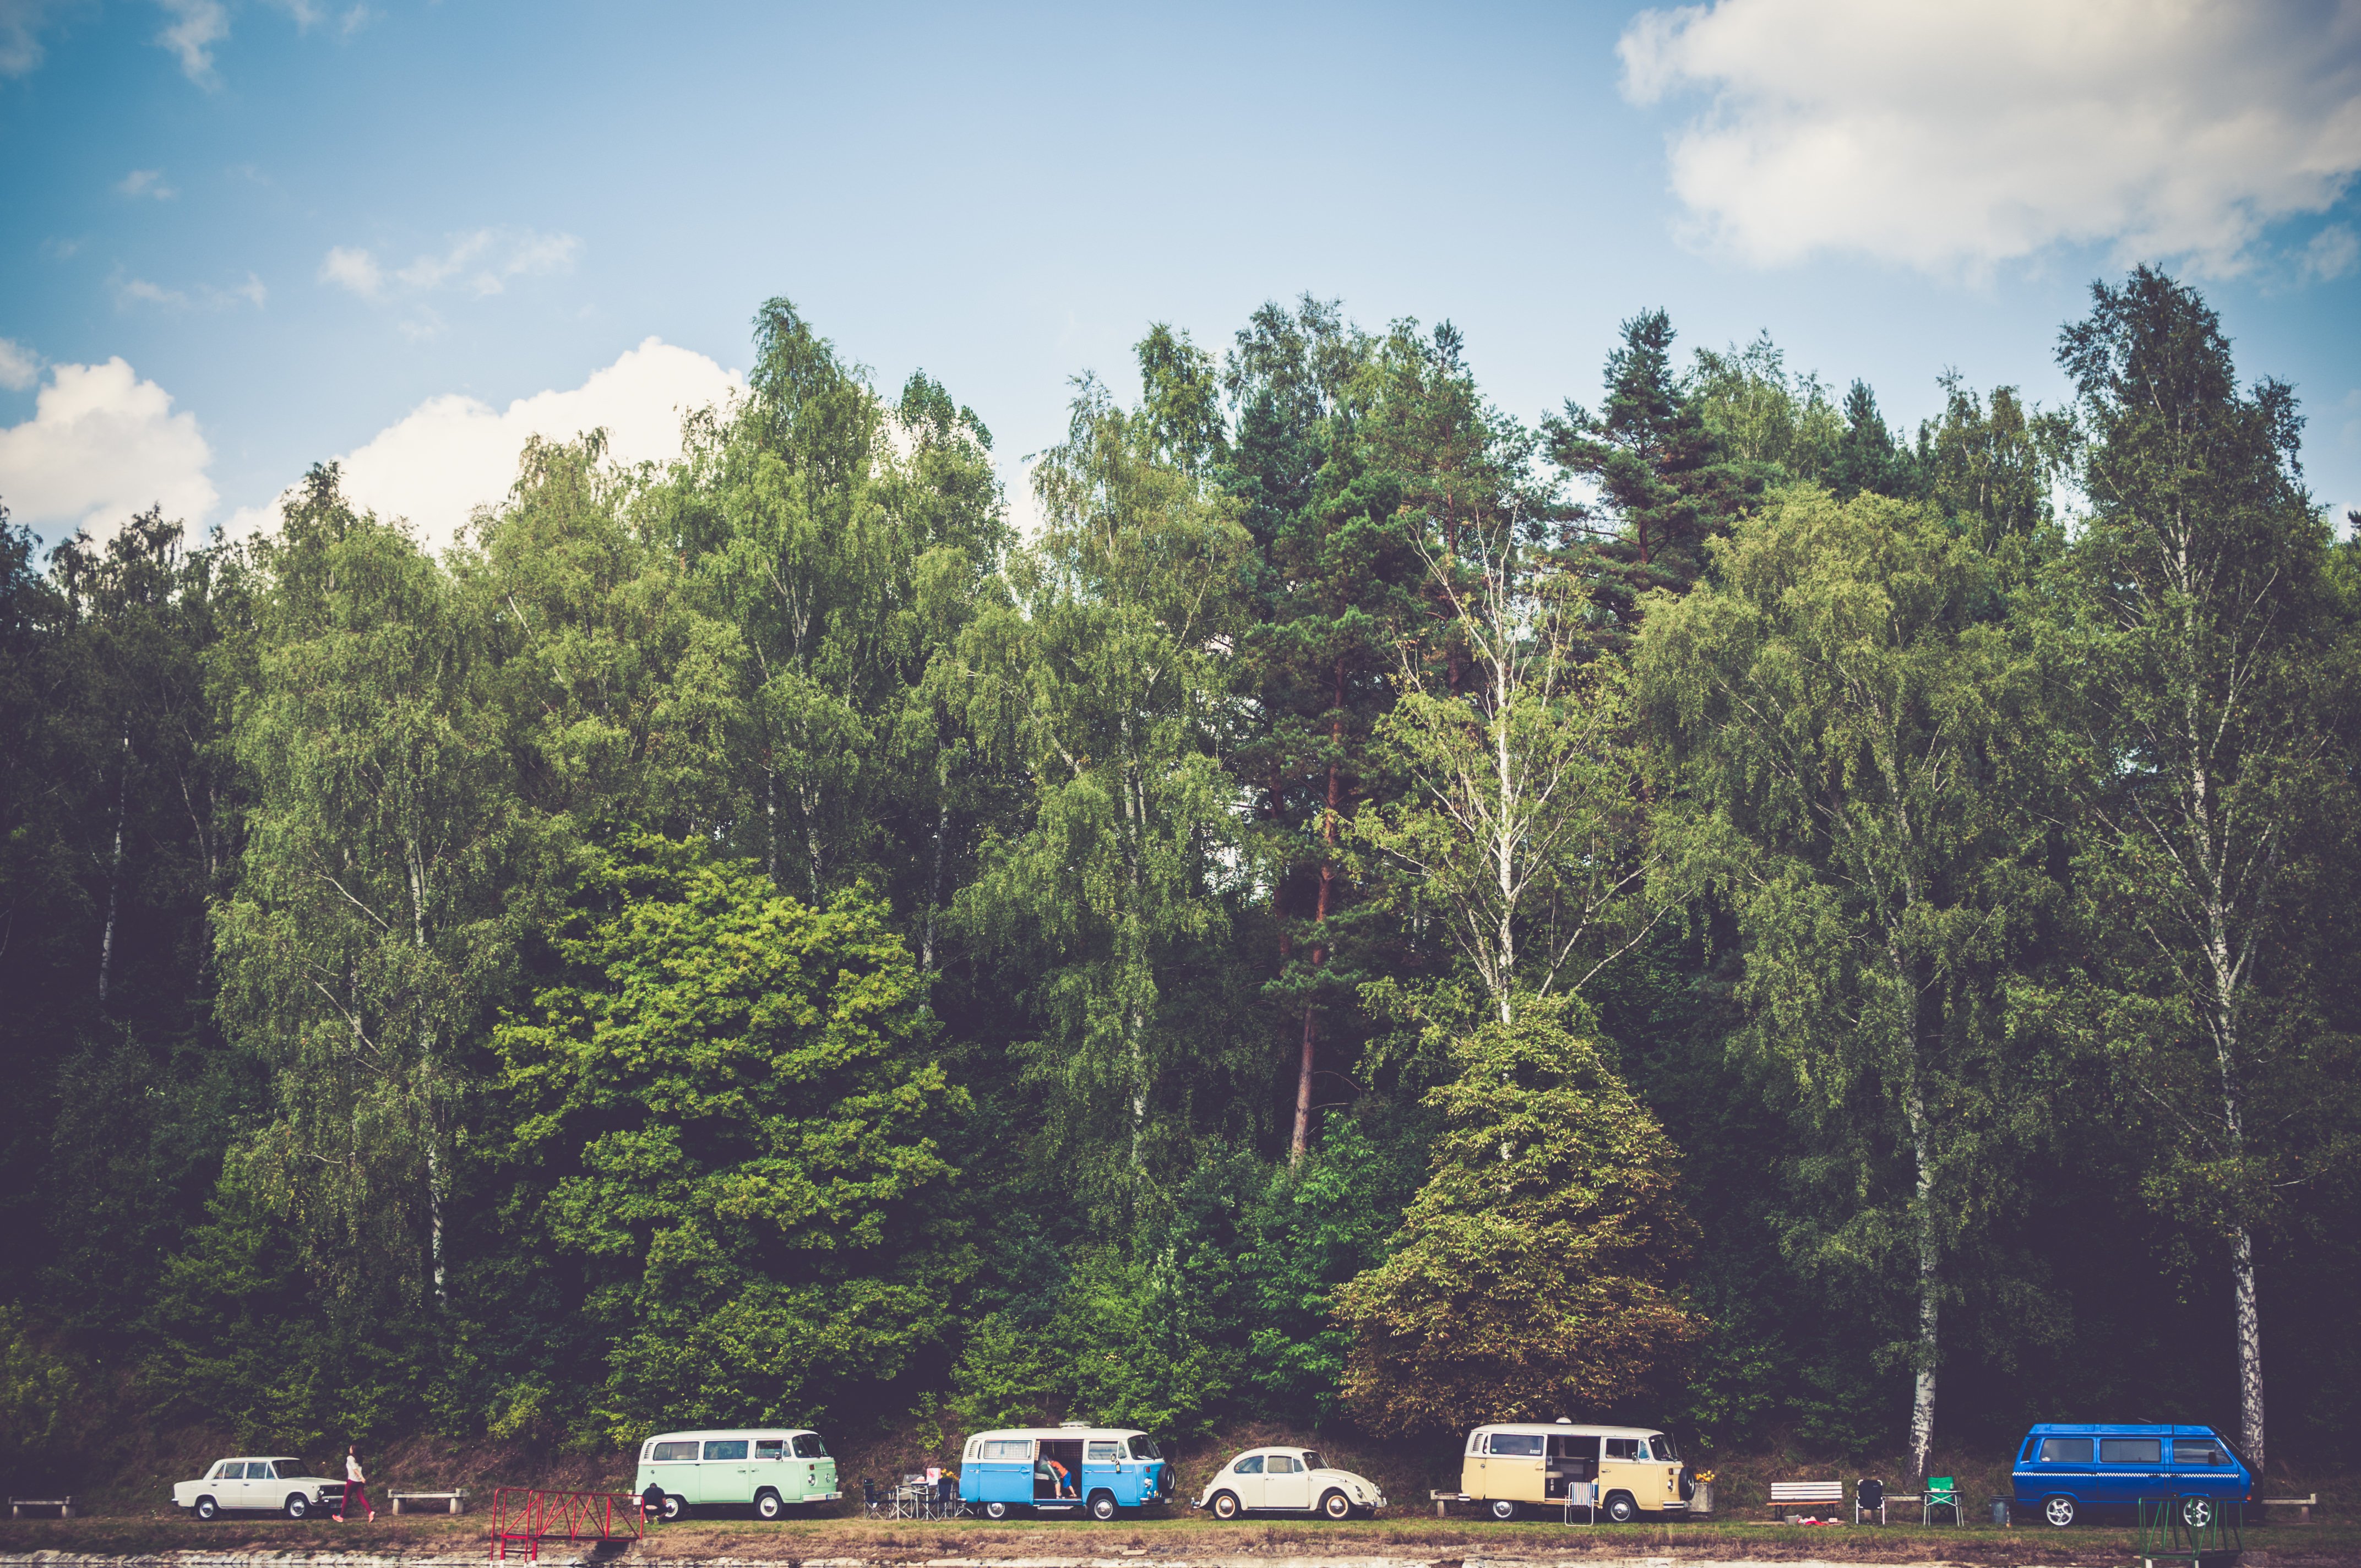 Getting Your Campervan Ready for Summer Adventures